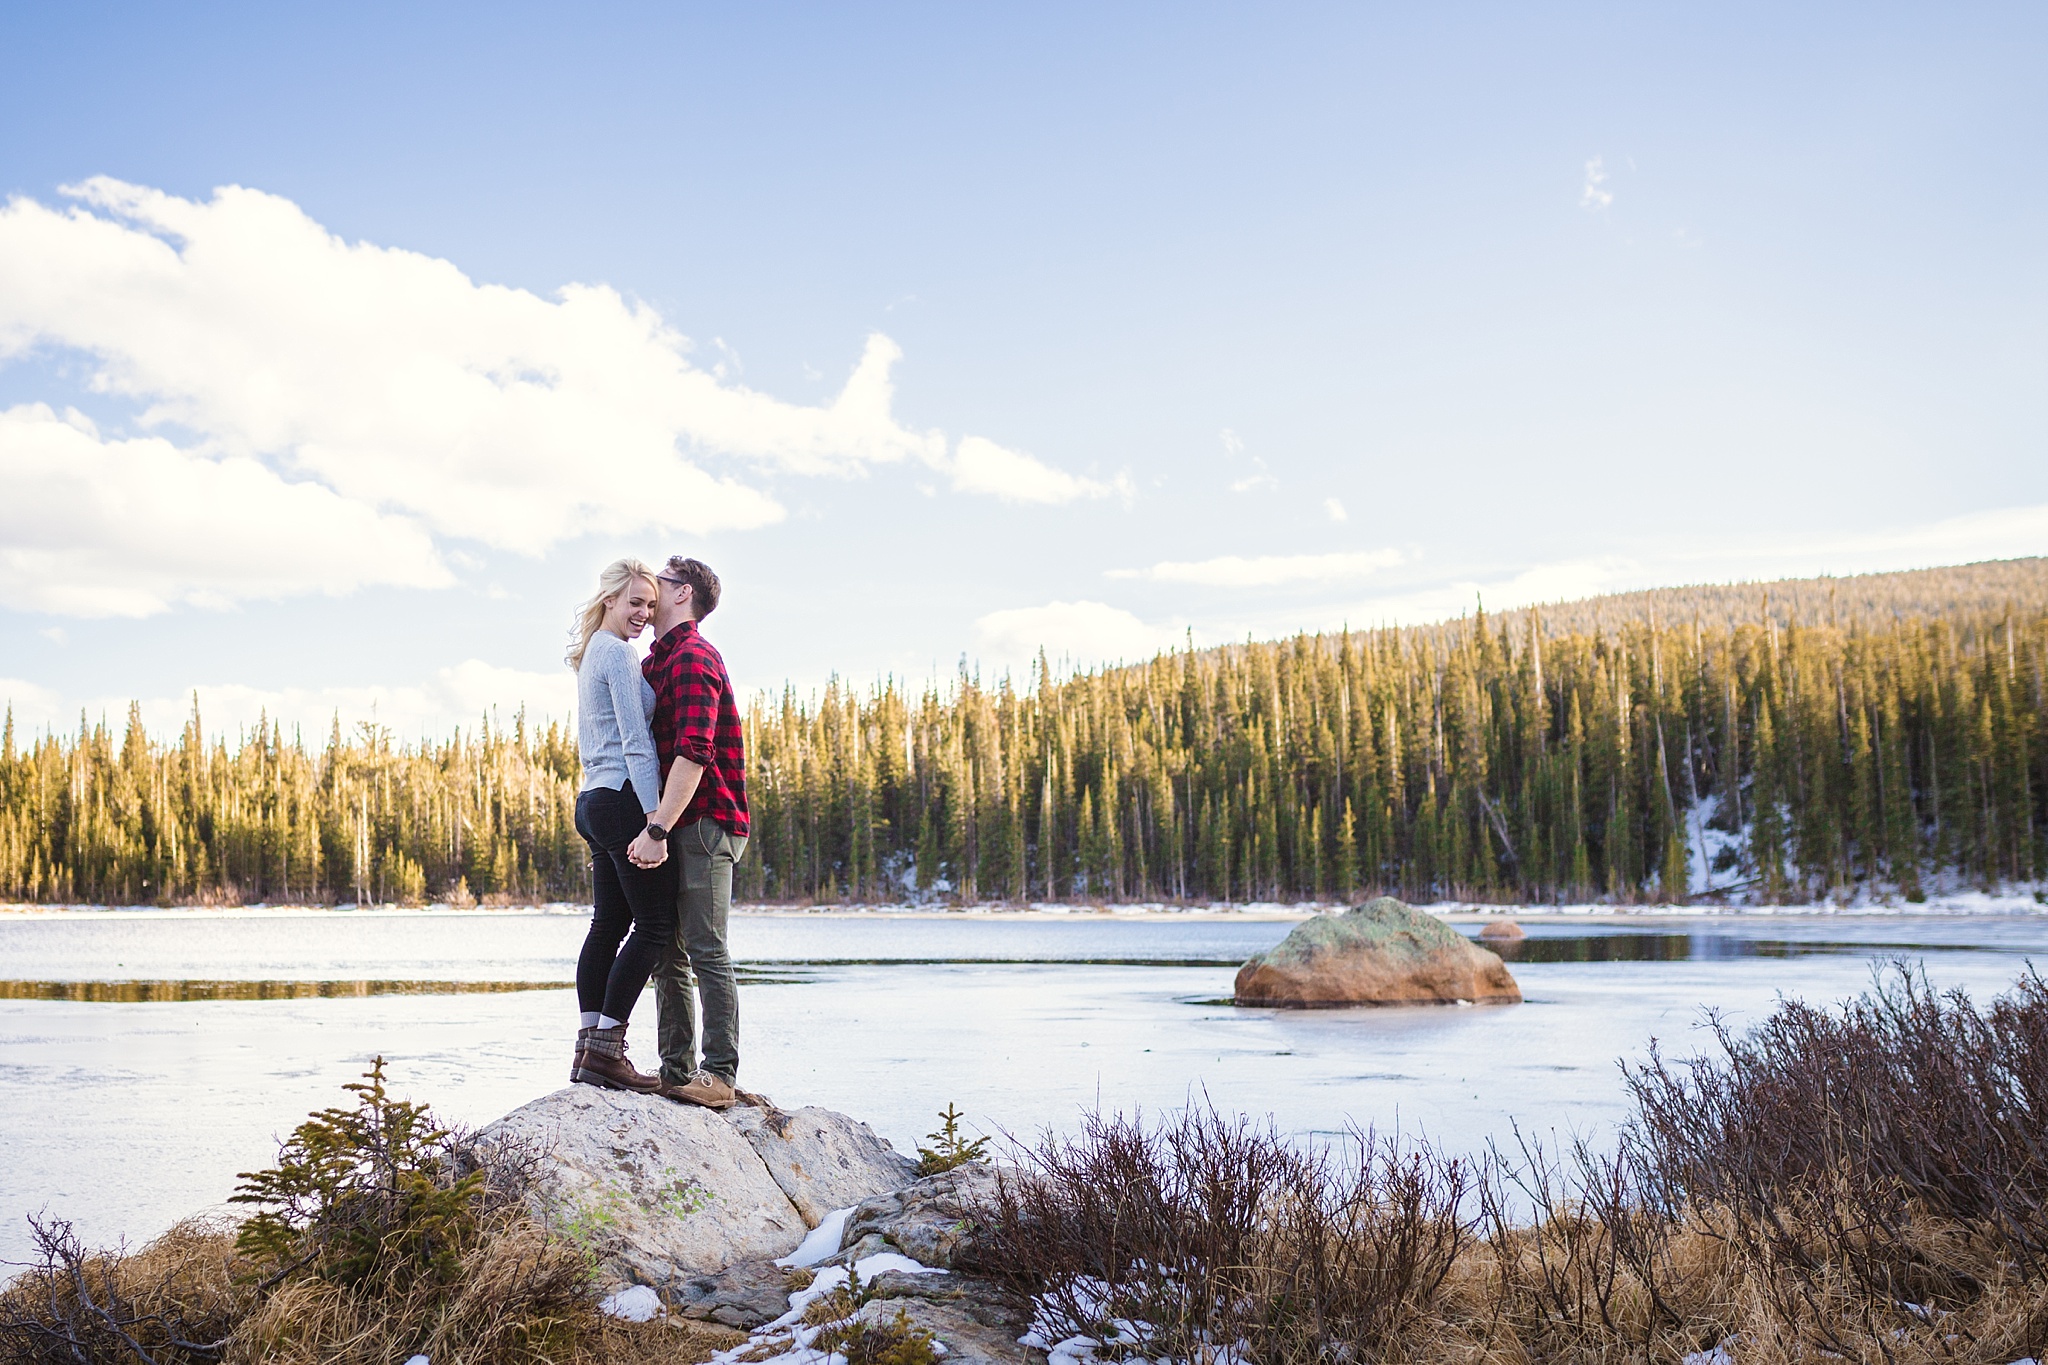 Man kissing his fiancé playfully with a lake and mountain views during their Colorado engagement session. Amy & Jonathan’s Brainard Lake Winter Engagement Session by Colorado Engagement Photographer, Jennifer Garza. Colorado Engagement Photographer, Colorado Engagement Photography, Brainard Lake Engagement Session, Brainard Lake Engagement Photos, Mountain Engagement Session, Colorado Winter Engagement Photos, Winter Engagement Photography, Mountain Engagement Photographer, Colorado Wedding